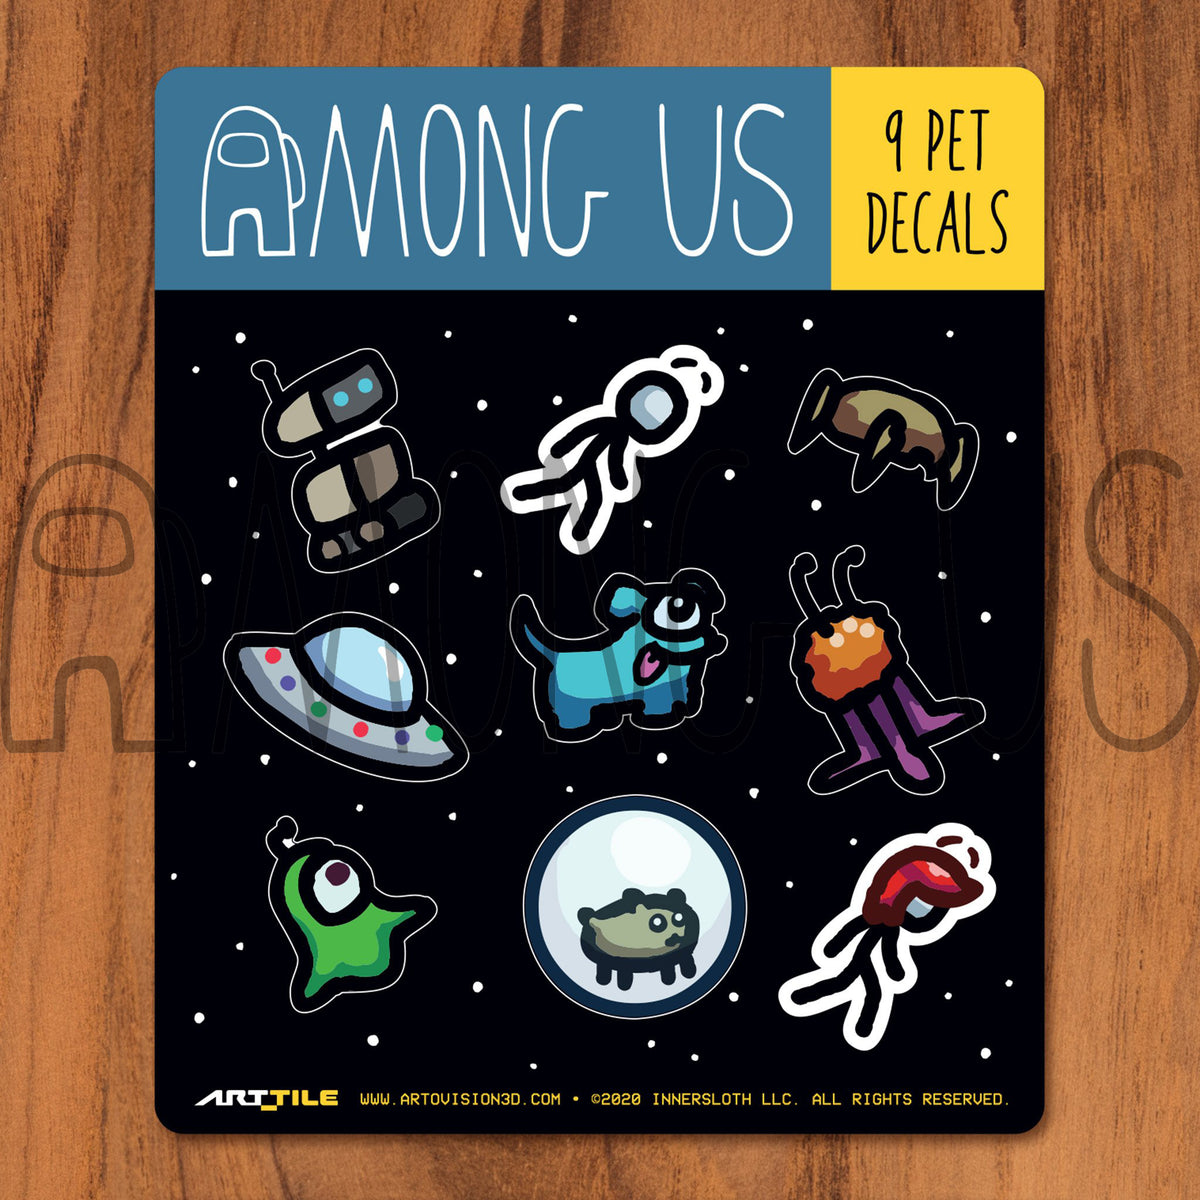 Among Us: Crewmate Art Tile Decals by Artovision3D